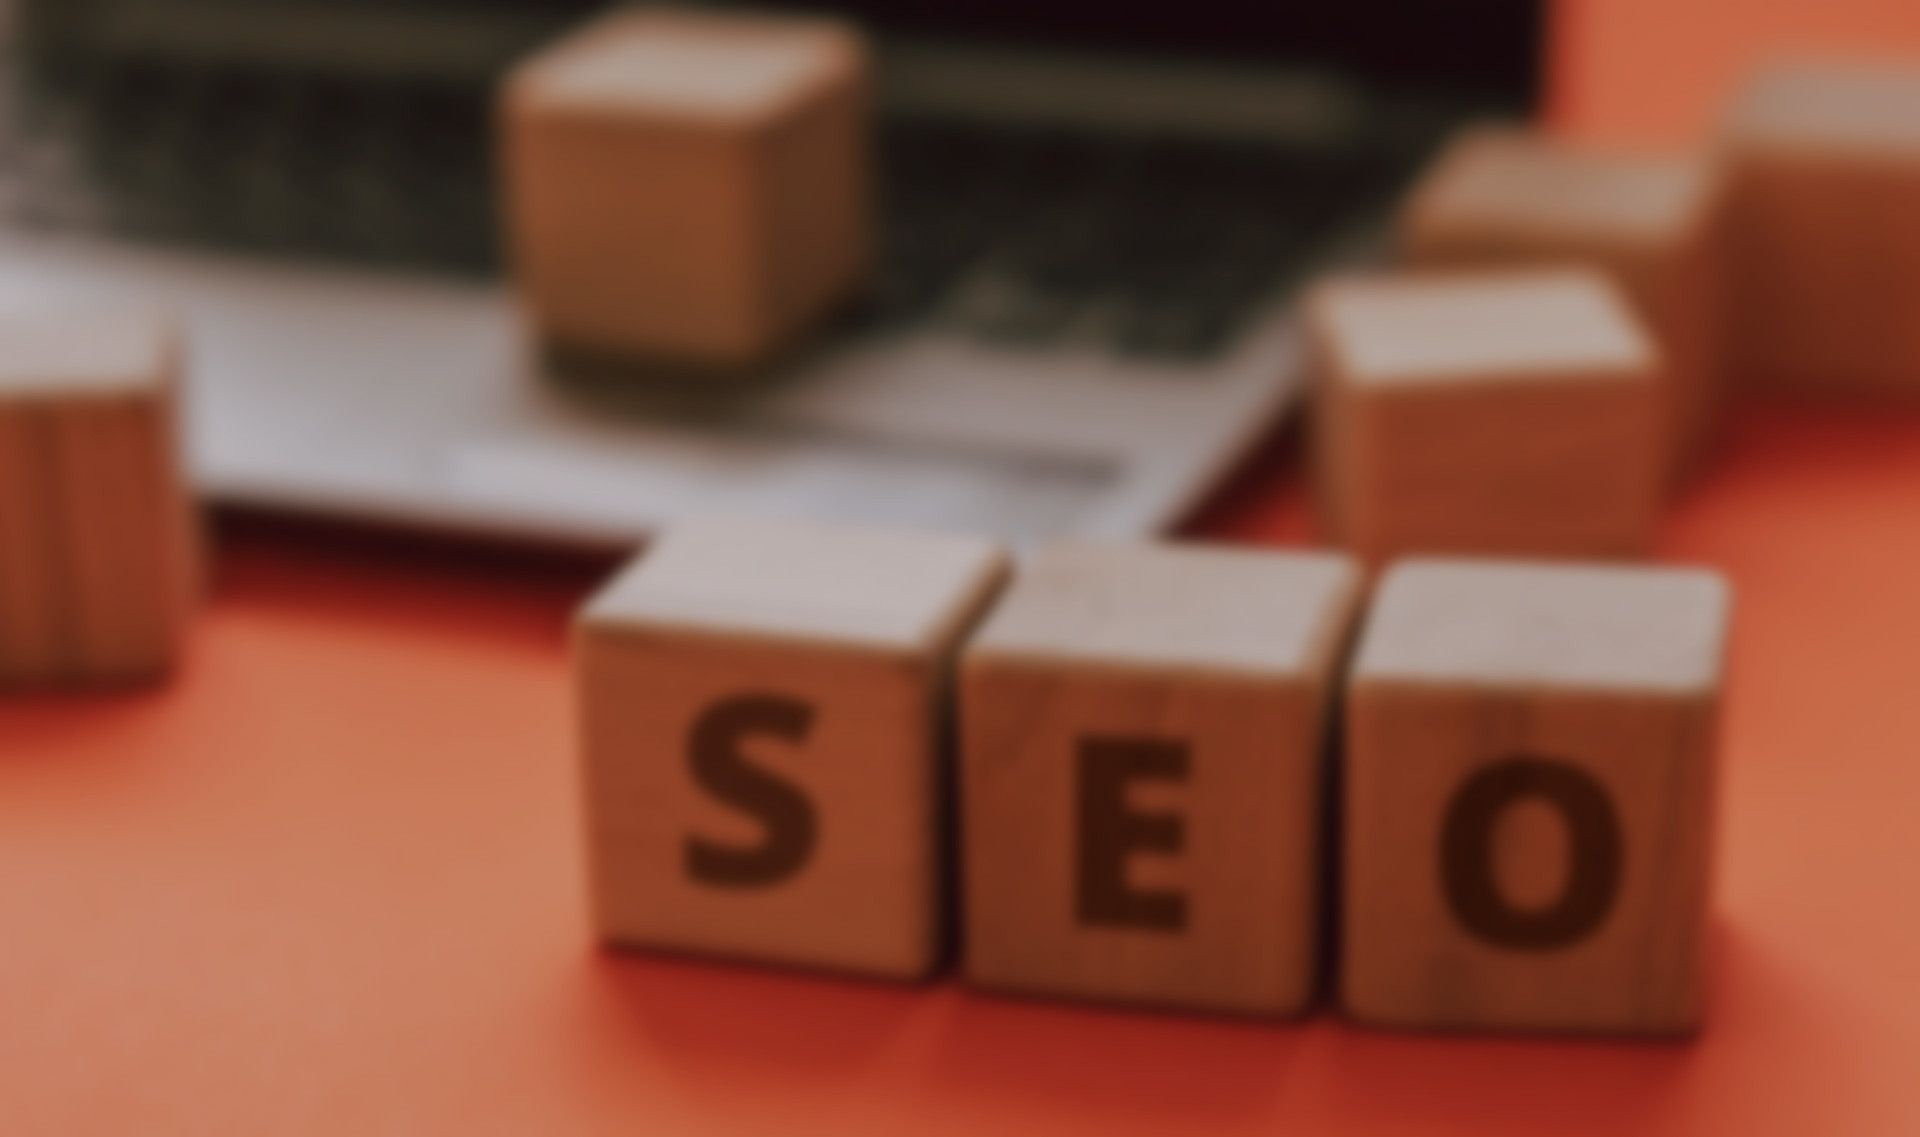 search engine optimization seo definitions guide